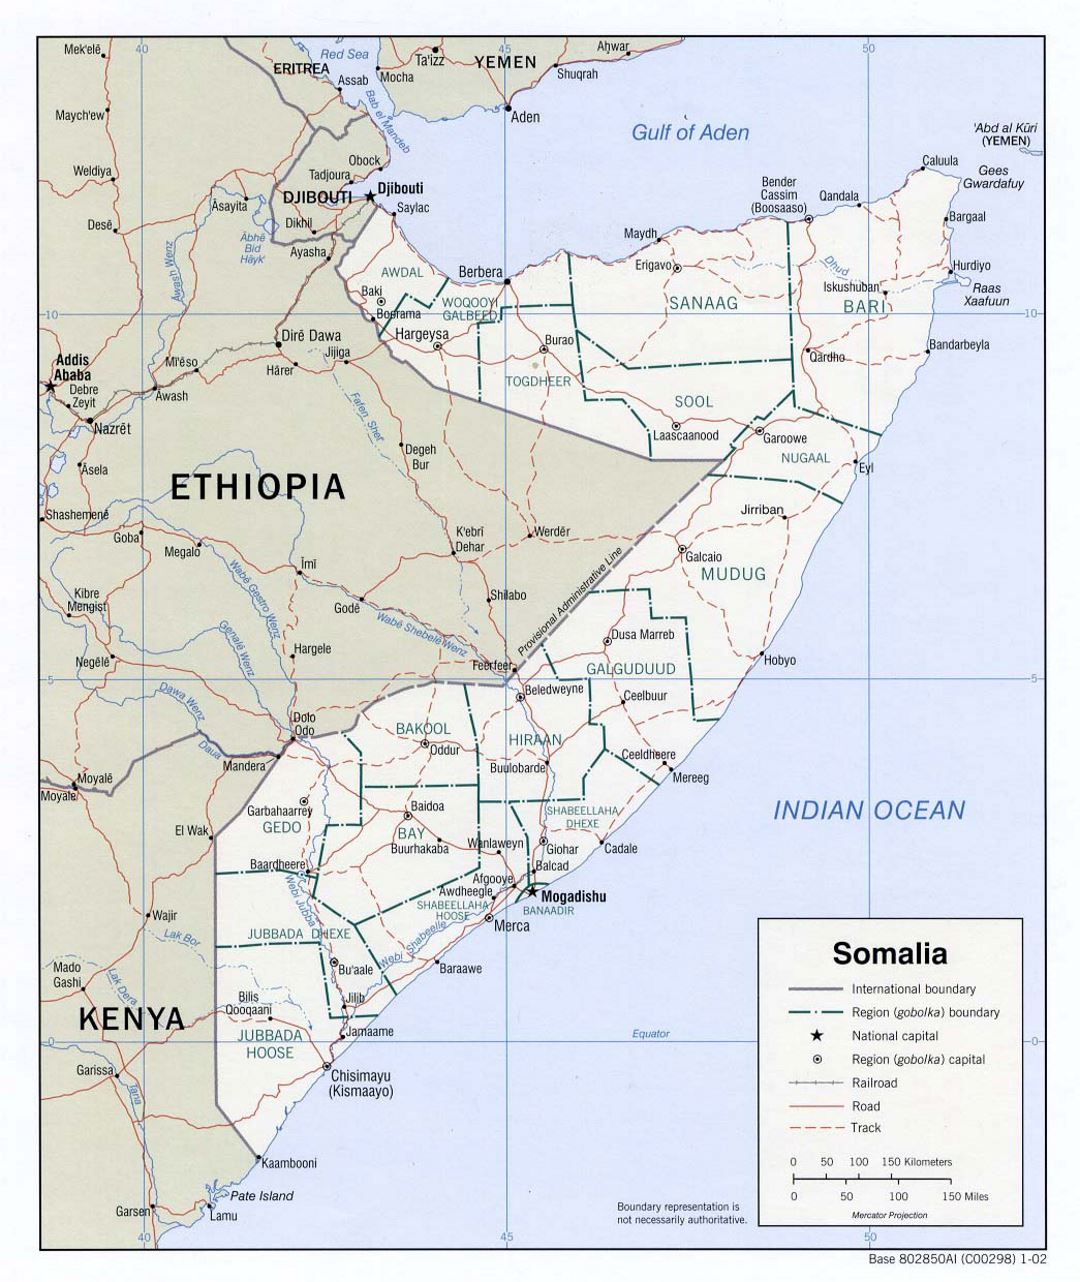 Detailed political and administrative map of Somalia with roads, railroads and major cities - 2002